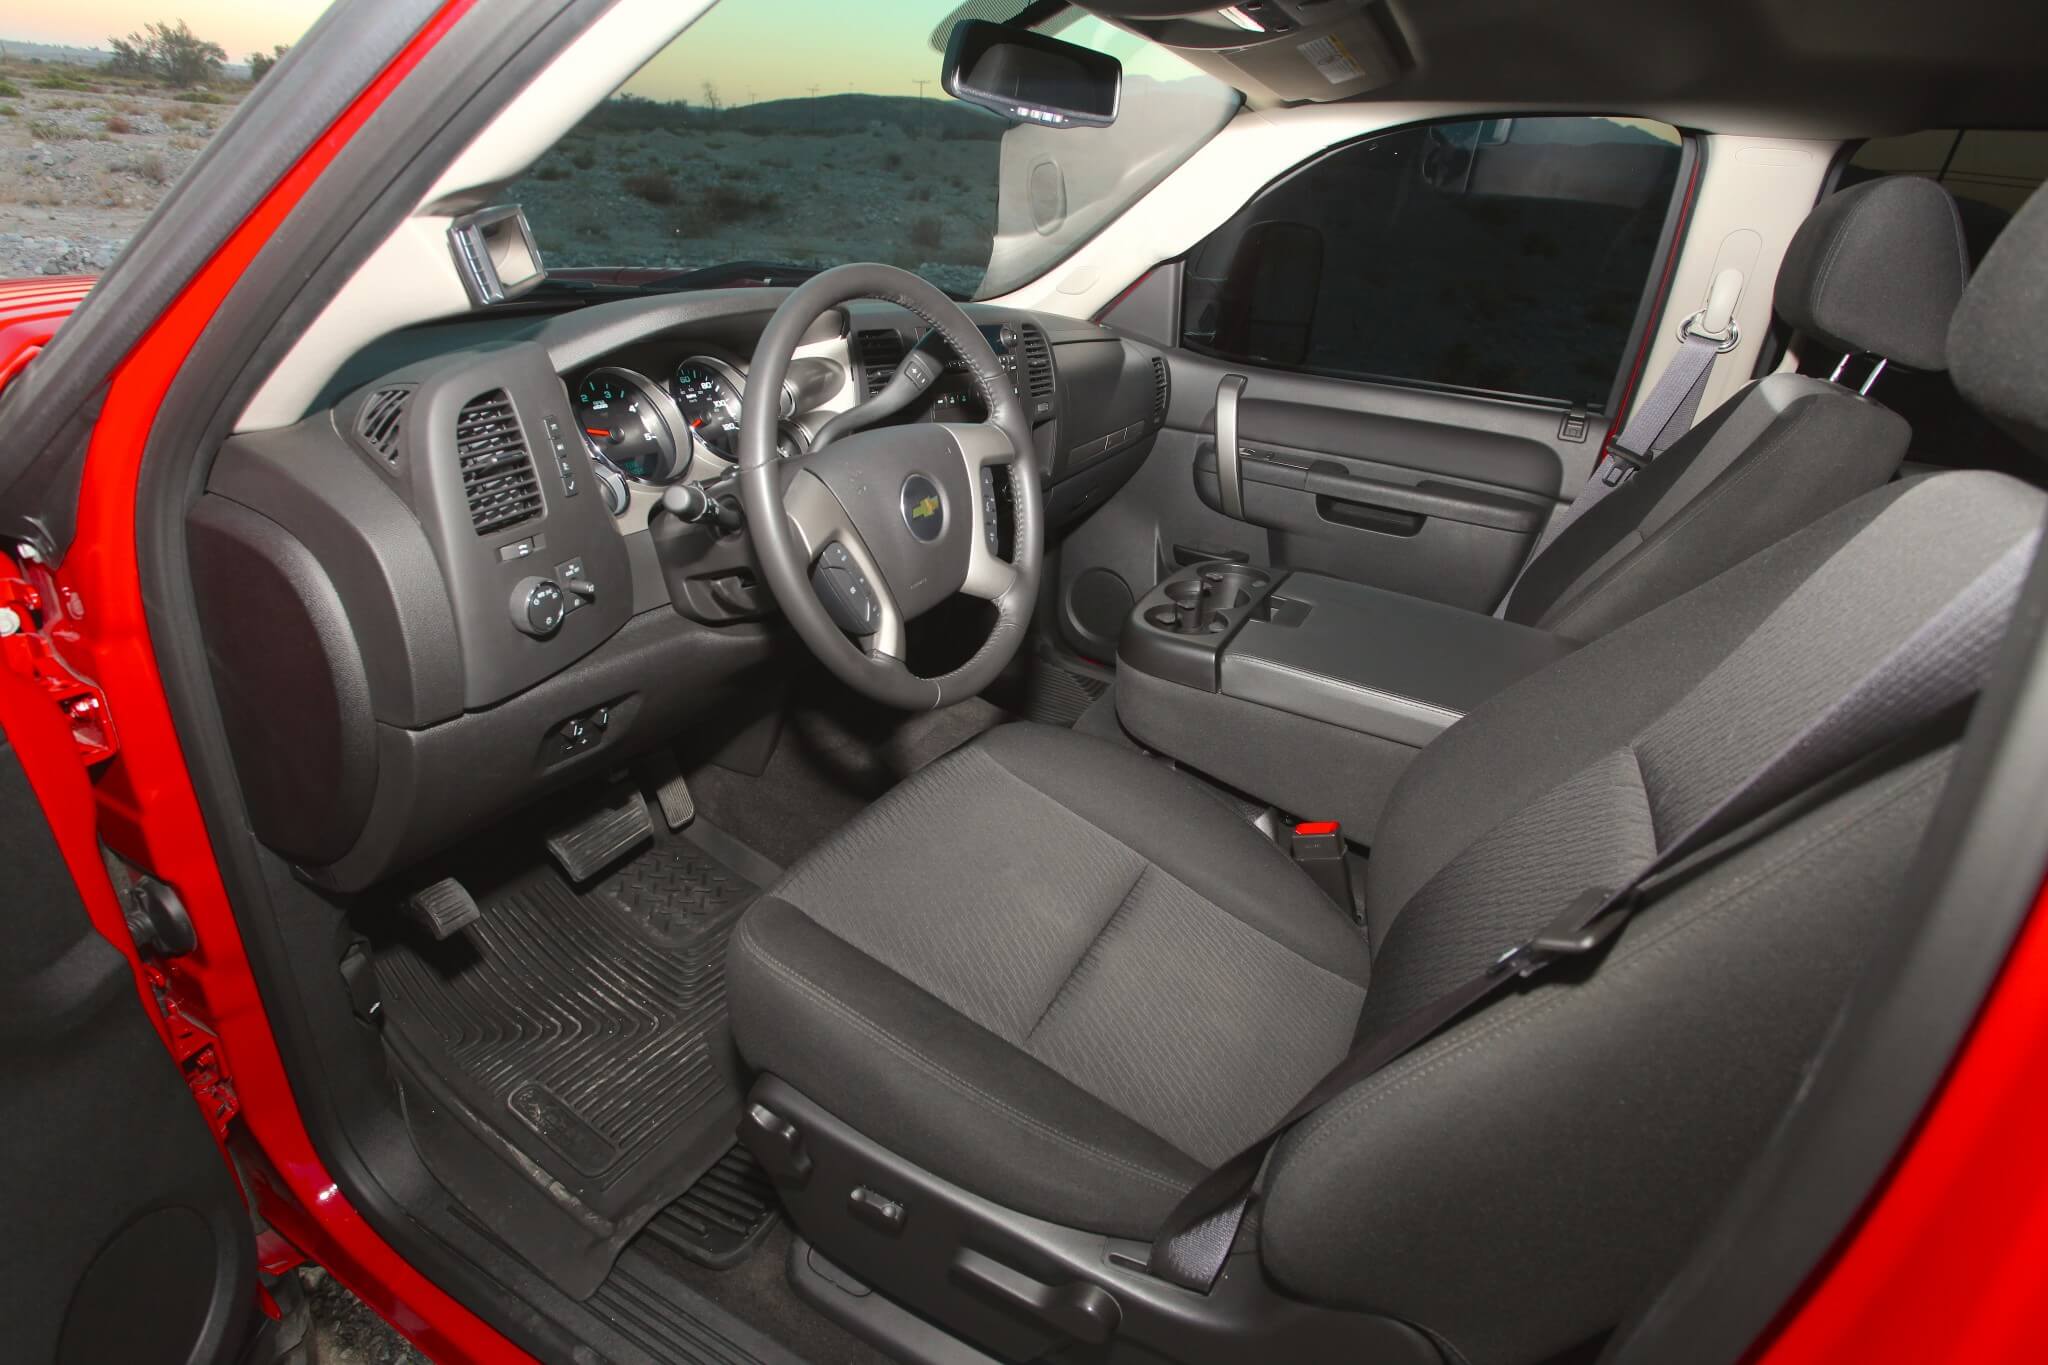 The black interior is plush enough for the long trips that owner Carlson makes with the truck. 